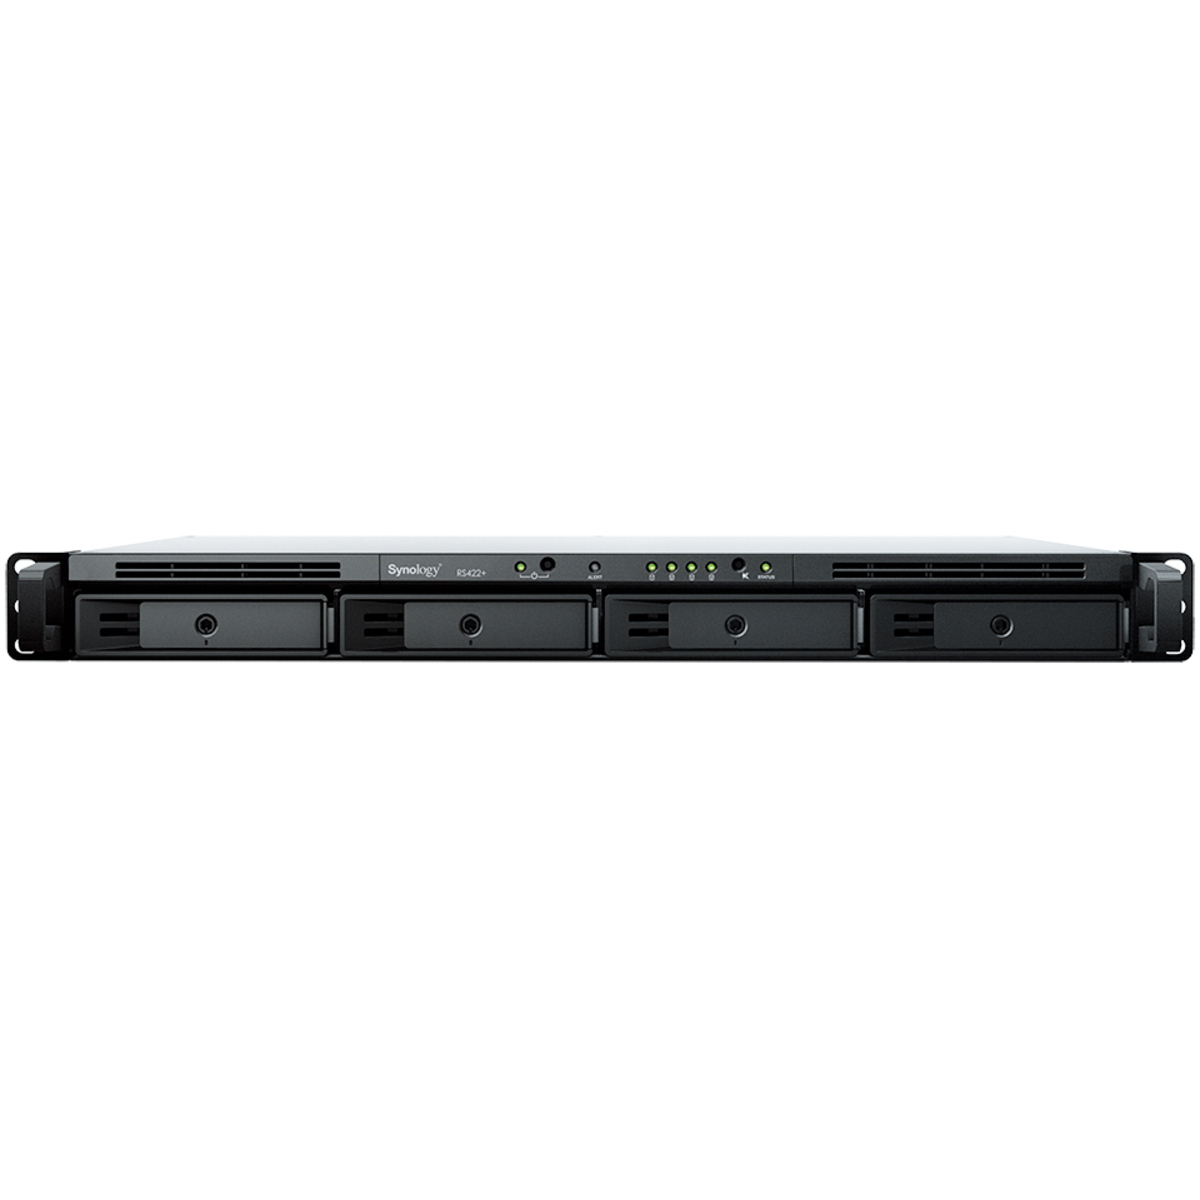 Synology RackStation RS422+ 32tb 4-Bay RackMount Personal / Basic Home / Small Office NAS - Network Attached Storage Device 4x8tb Samsung 870 QVO MZ-77Q8T0 2.5 560/530MB/s SATA 6Gb/s SSD CONSUMER Class Drives Installed - Burn-In Tested RackStation RS422+